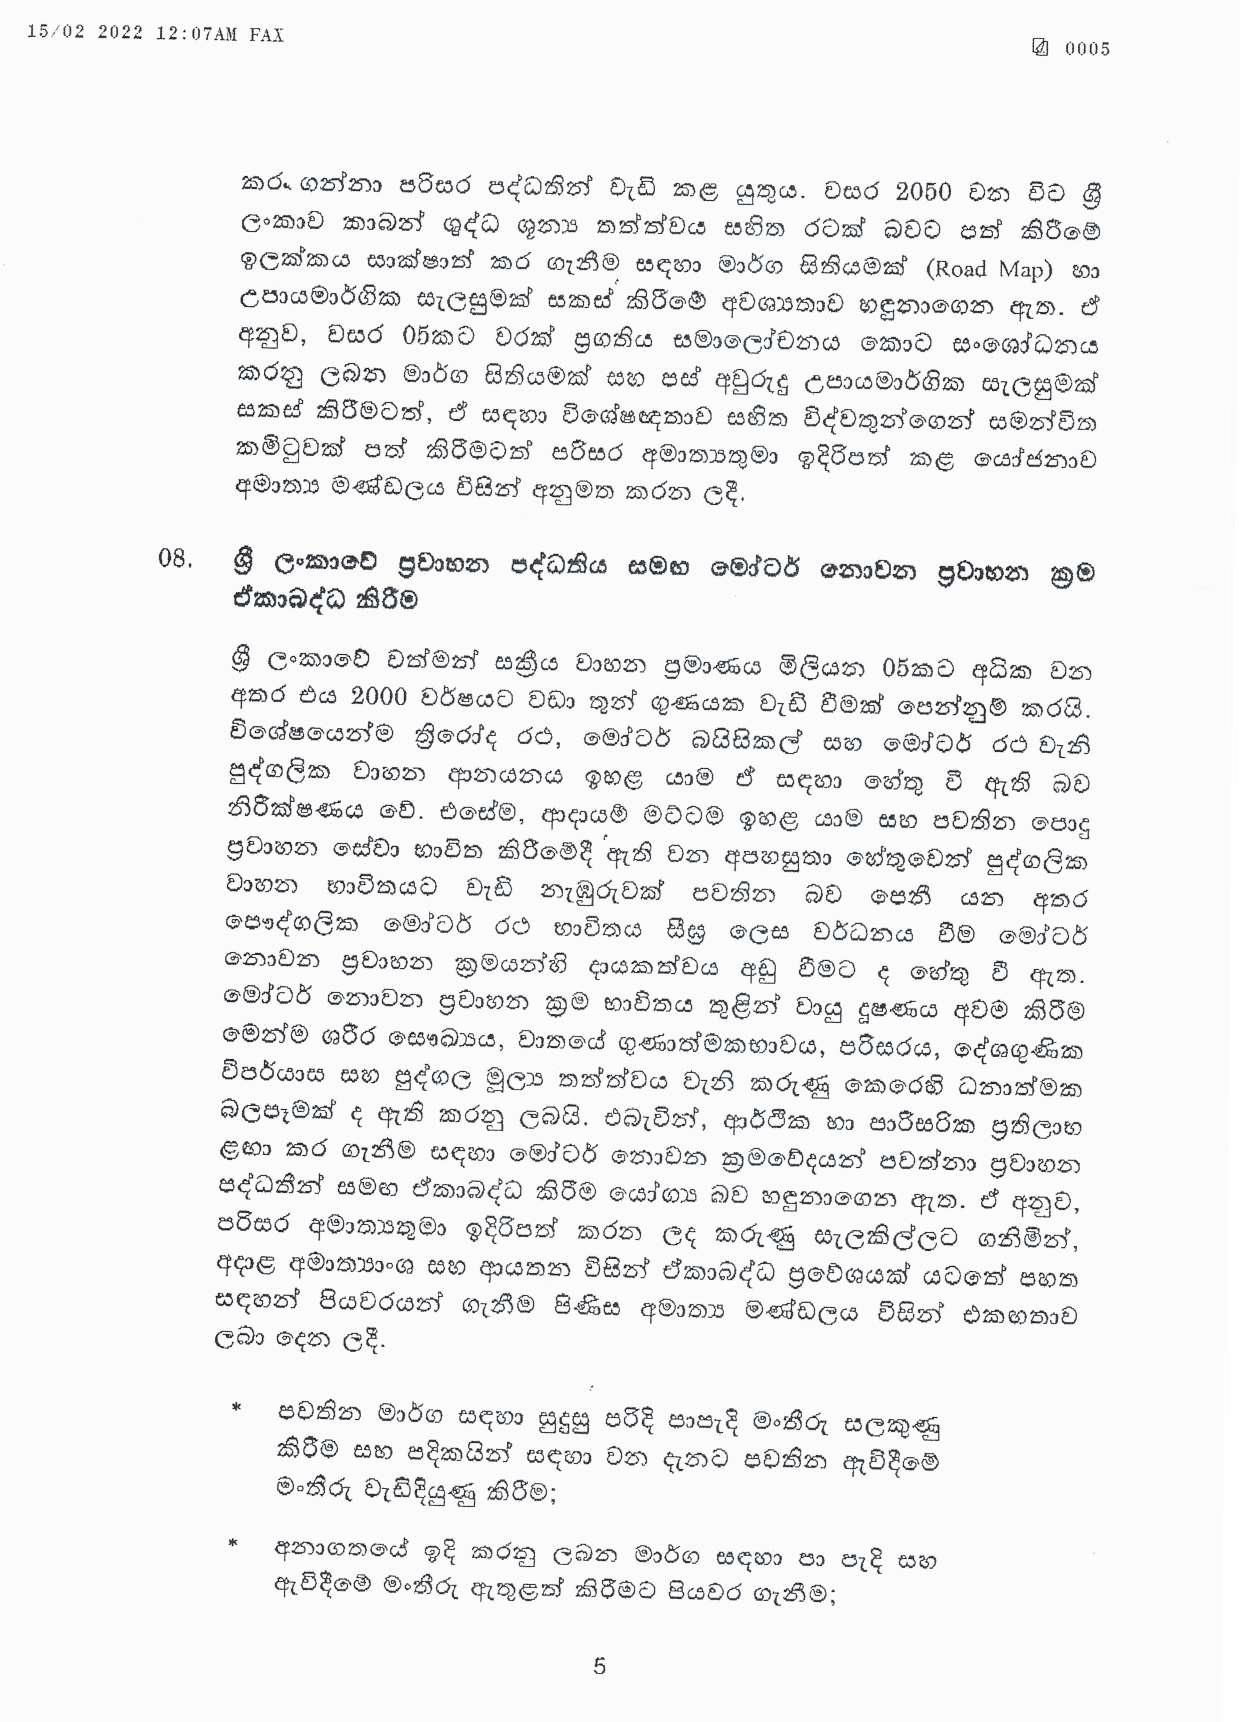 Cabinet Decision on 14.02.2022 page 005